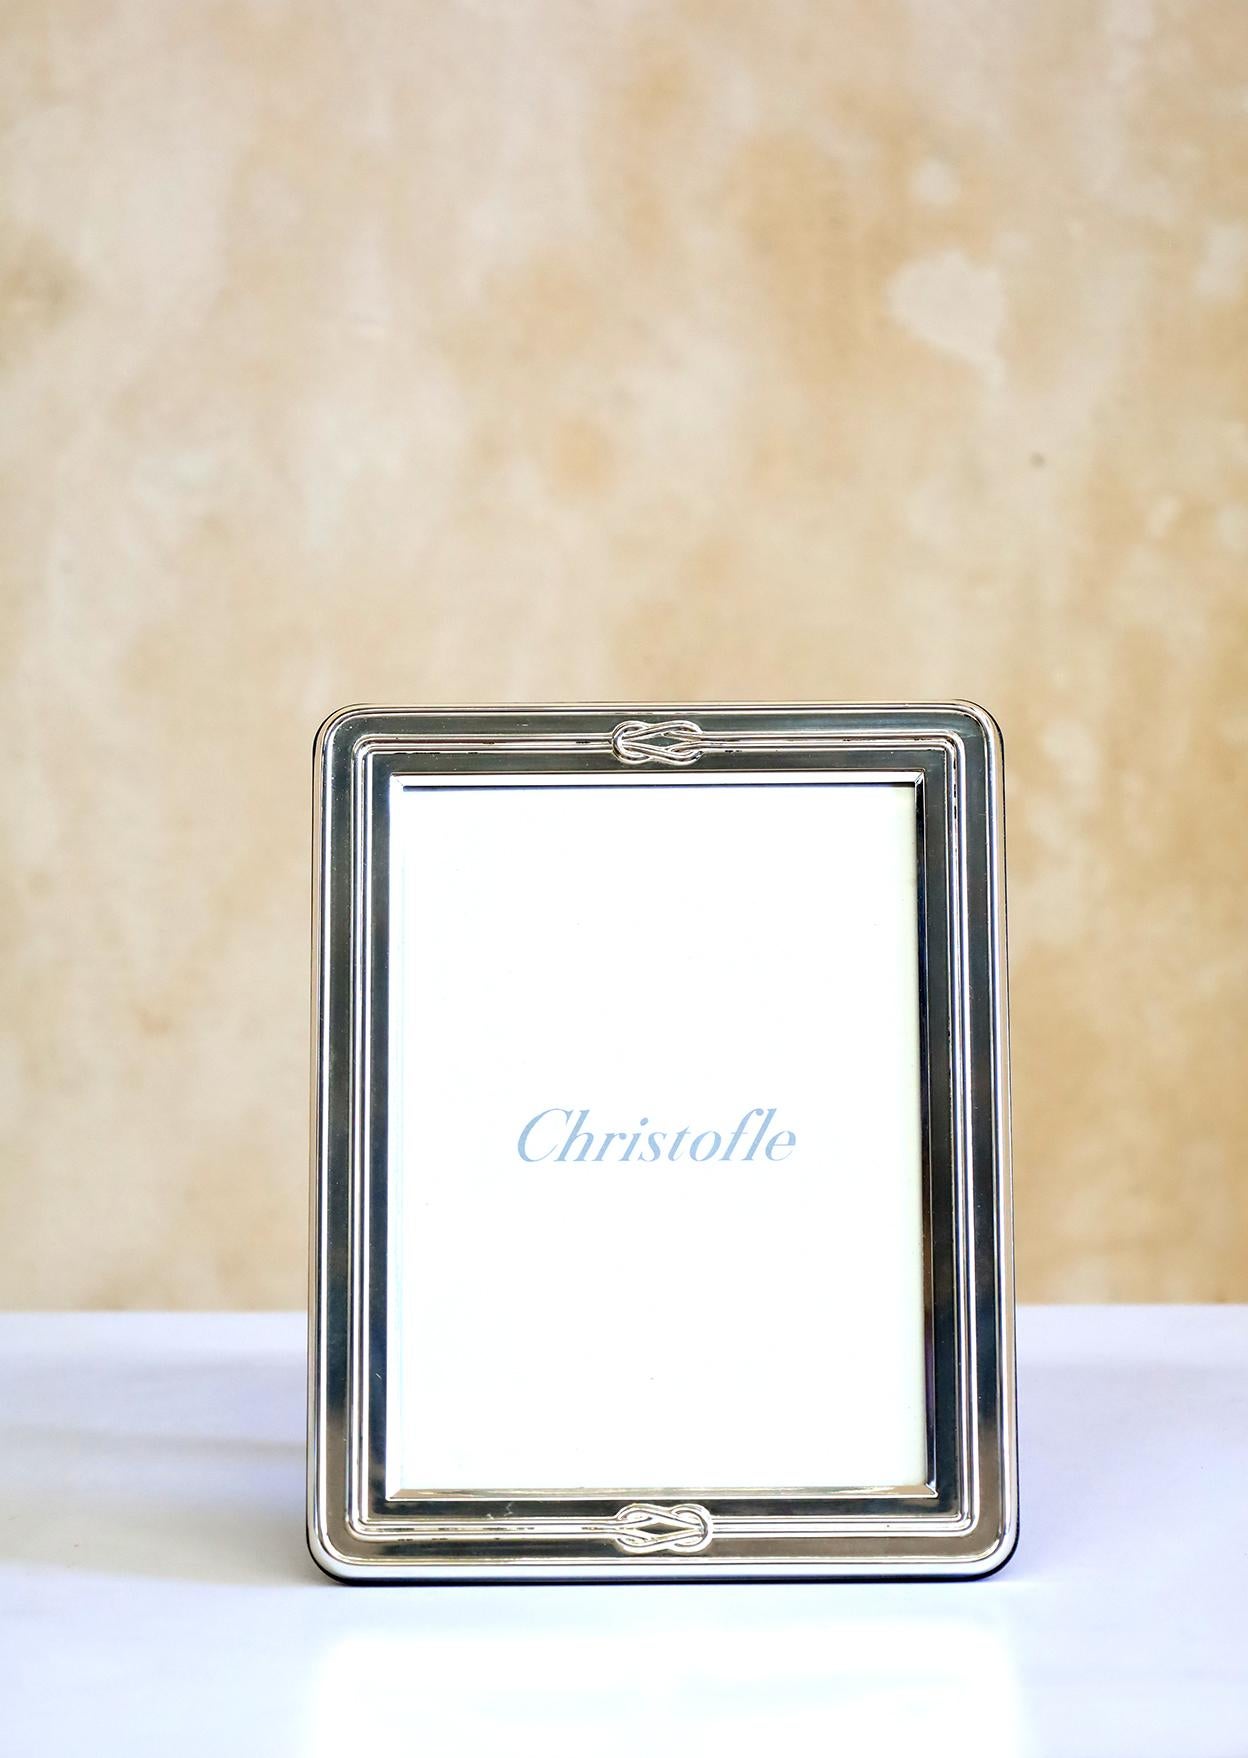 Christofle picture frame. Original from Christofle.
Very elegant and clean.